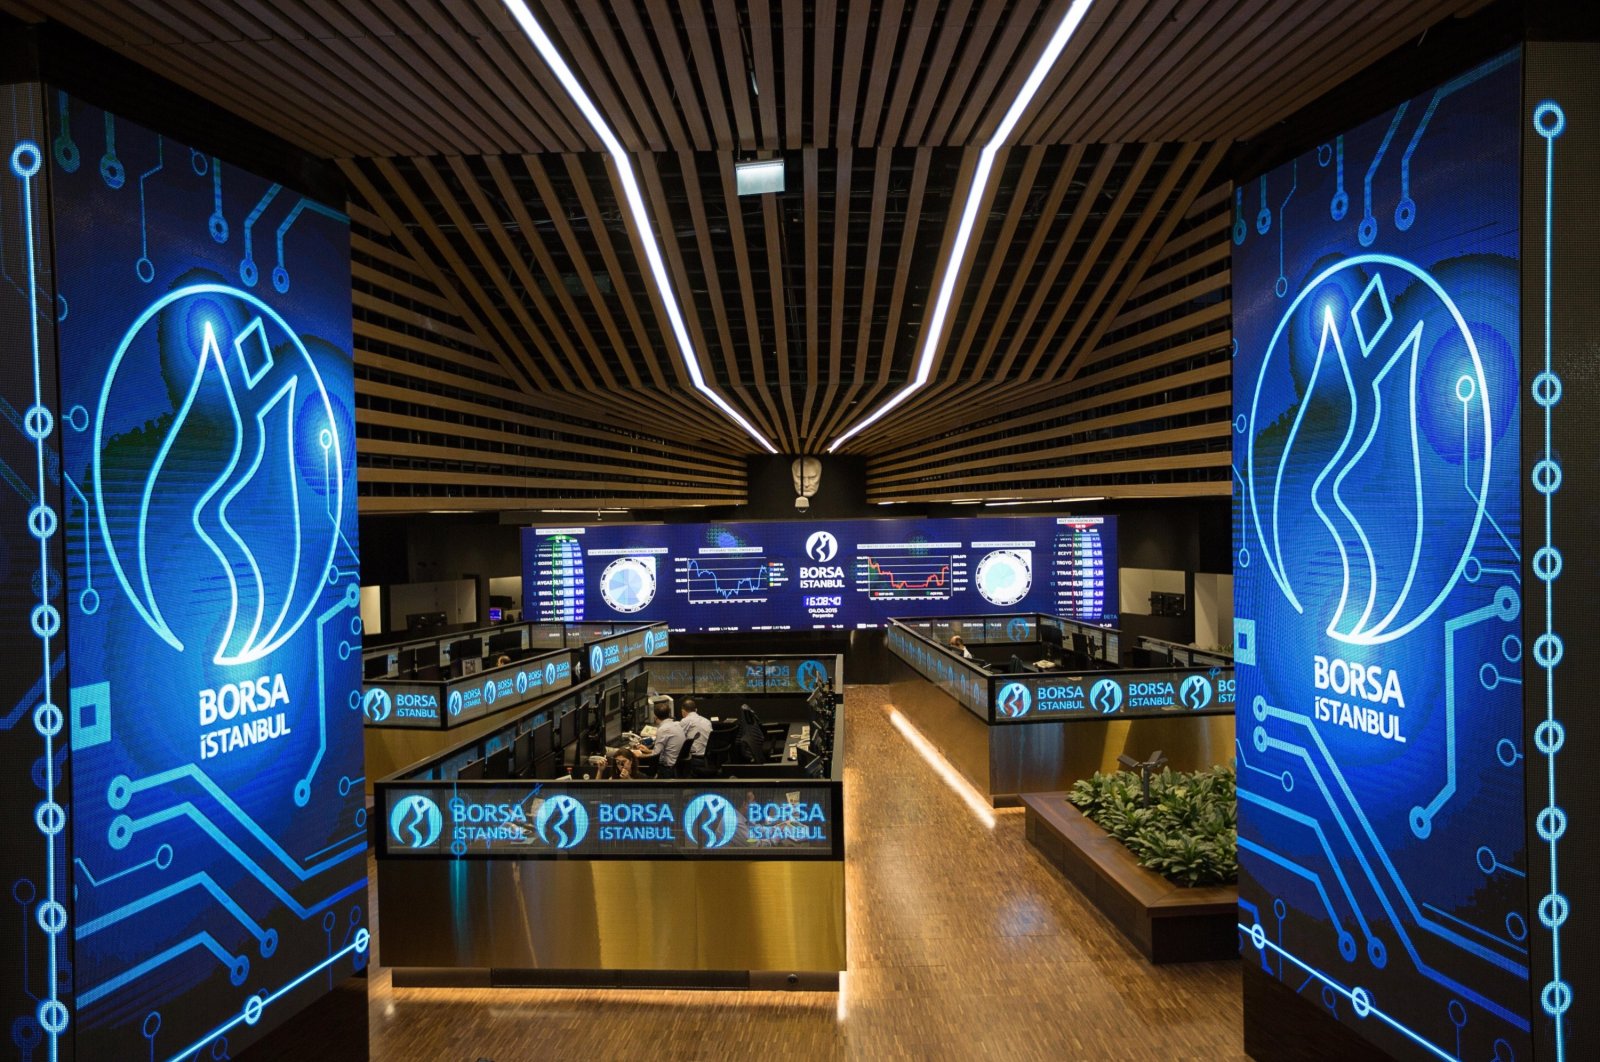 A general view shows the trading floor at Borsa Istanbul in Istanbul, Turkey, Oct. 13, 2017. (Reuters Photo)